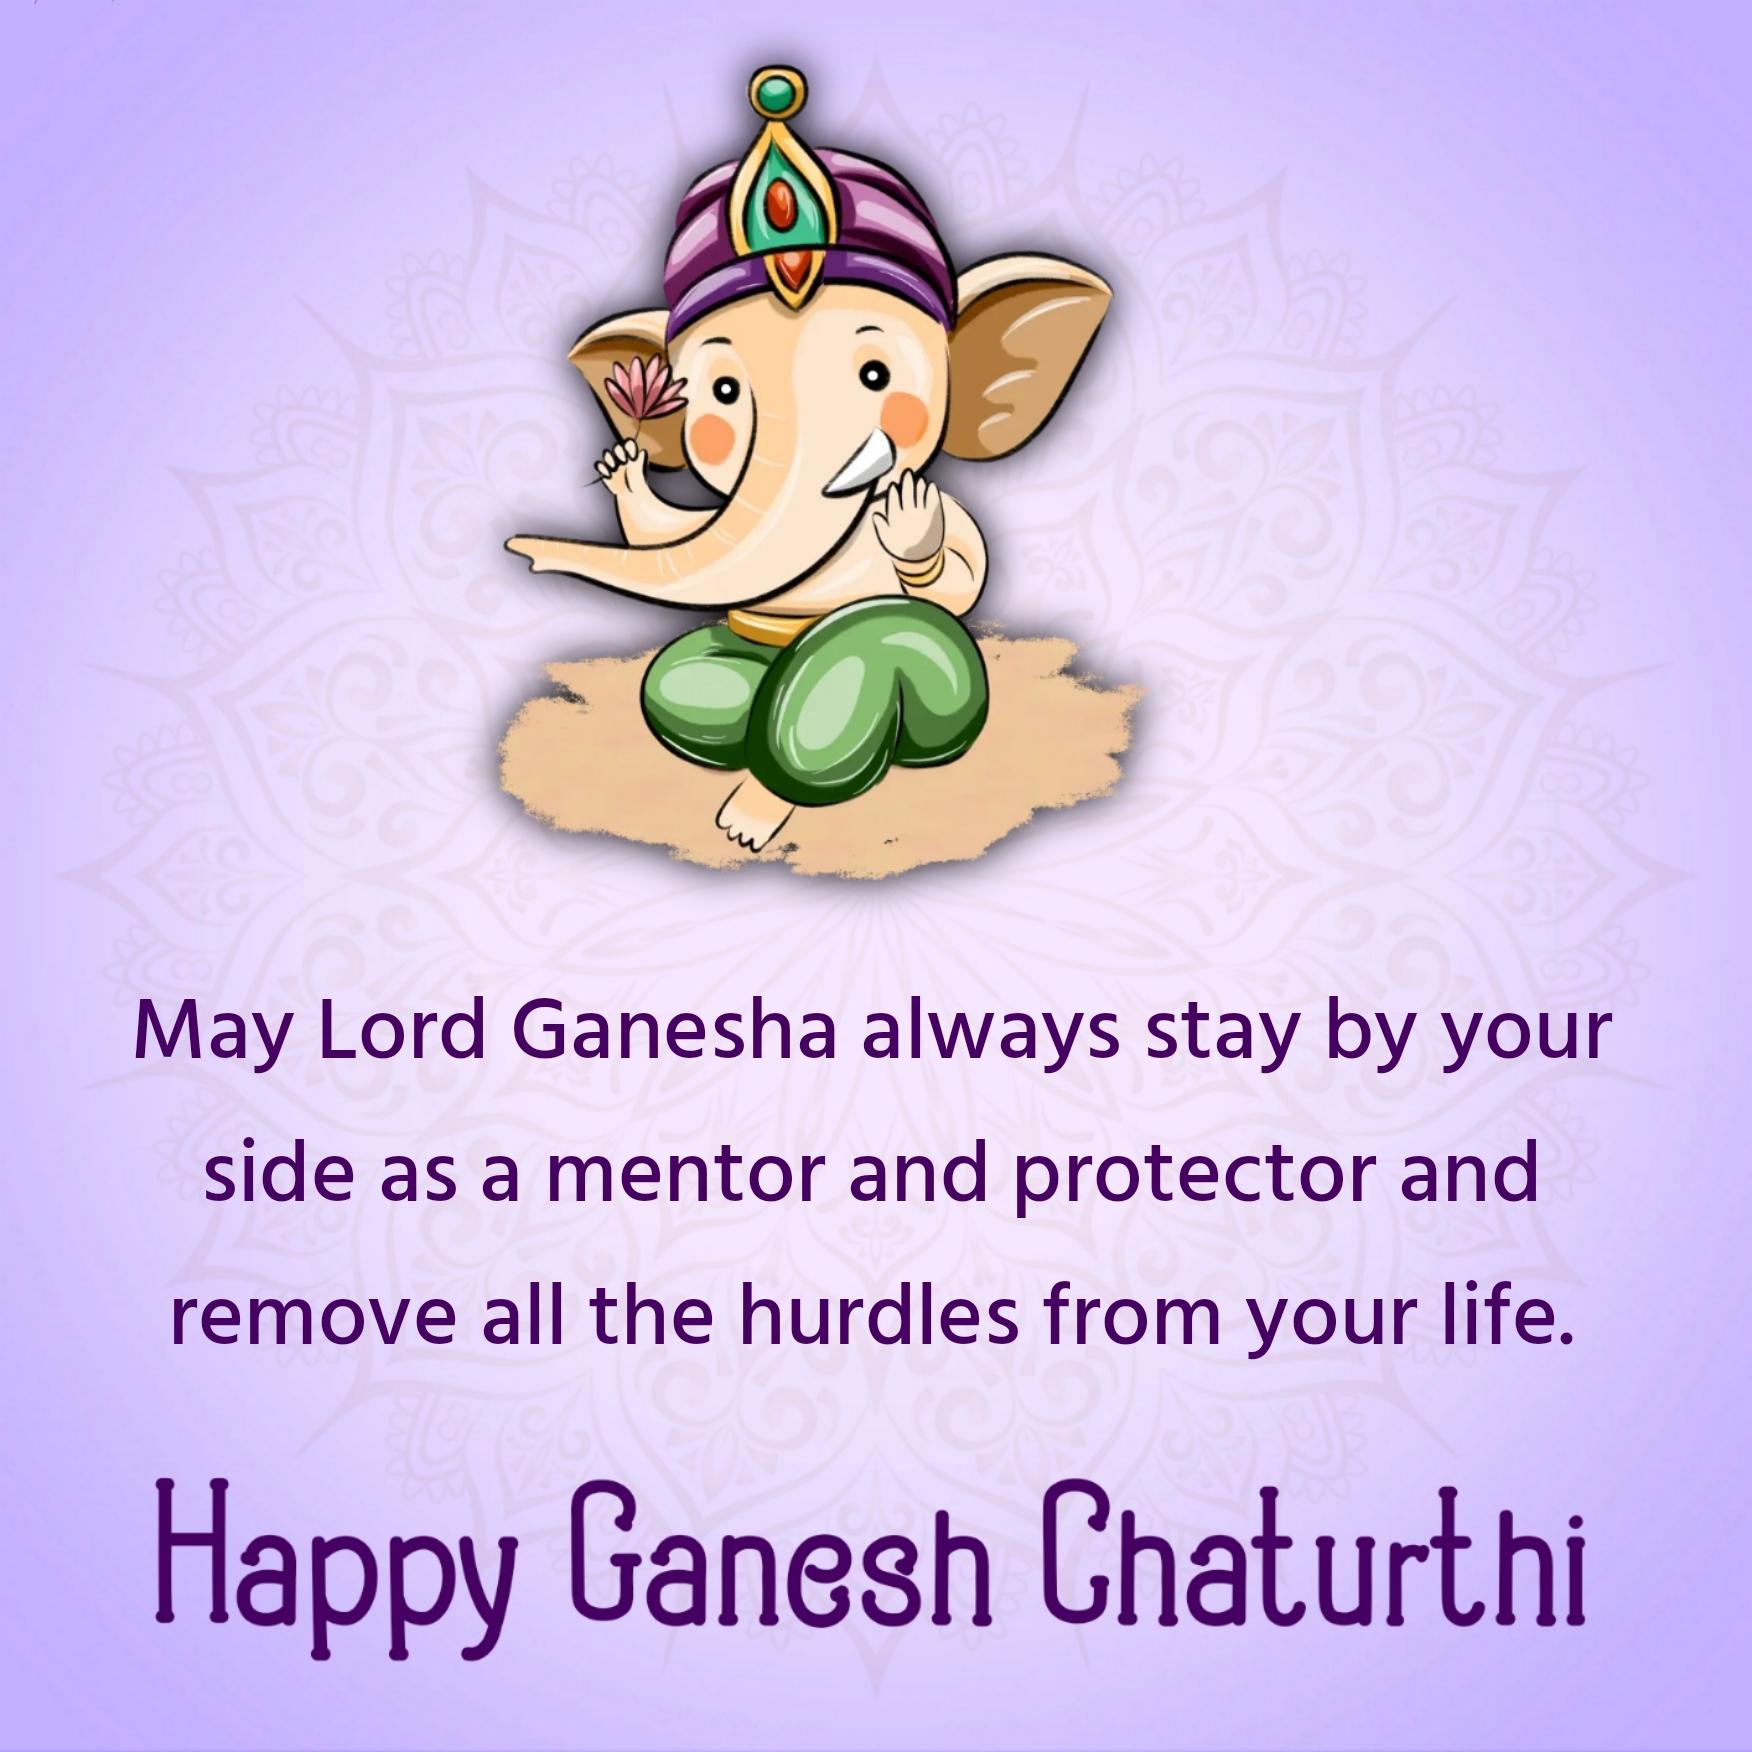 May Lord Ganesha always stay by your side